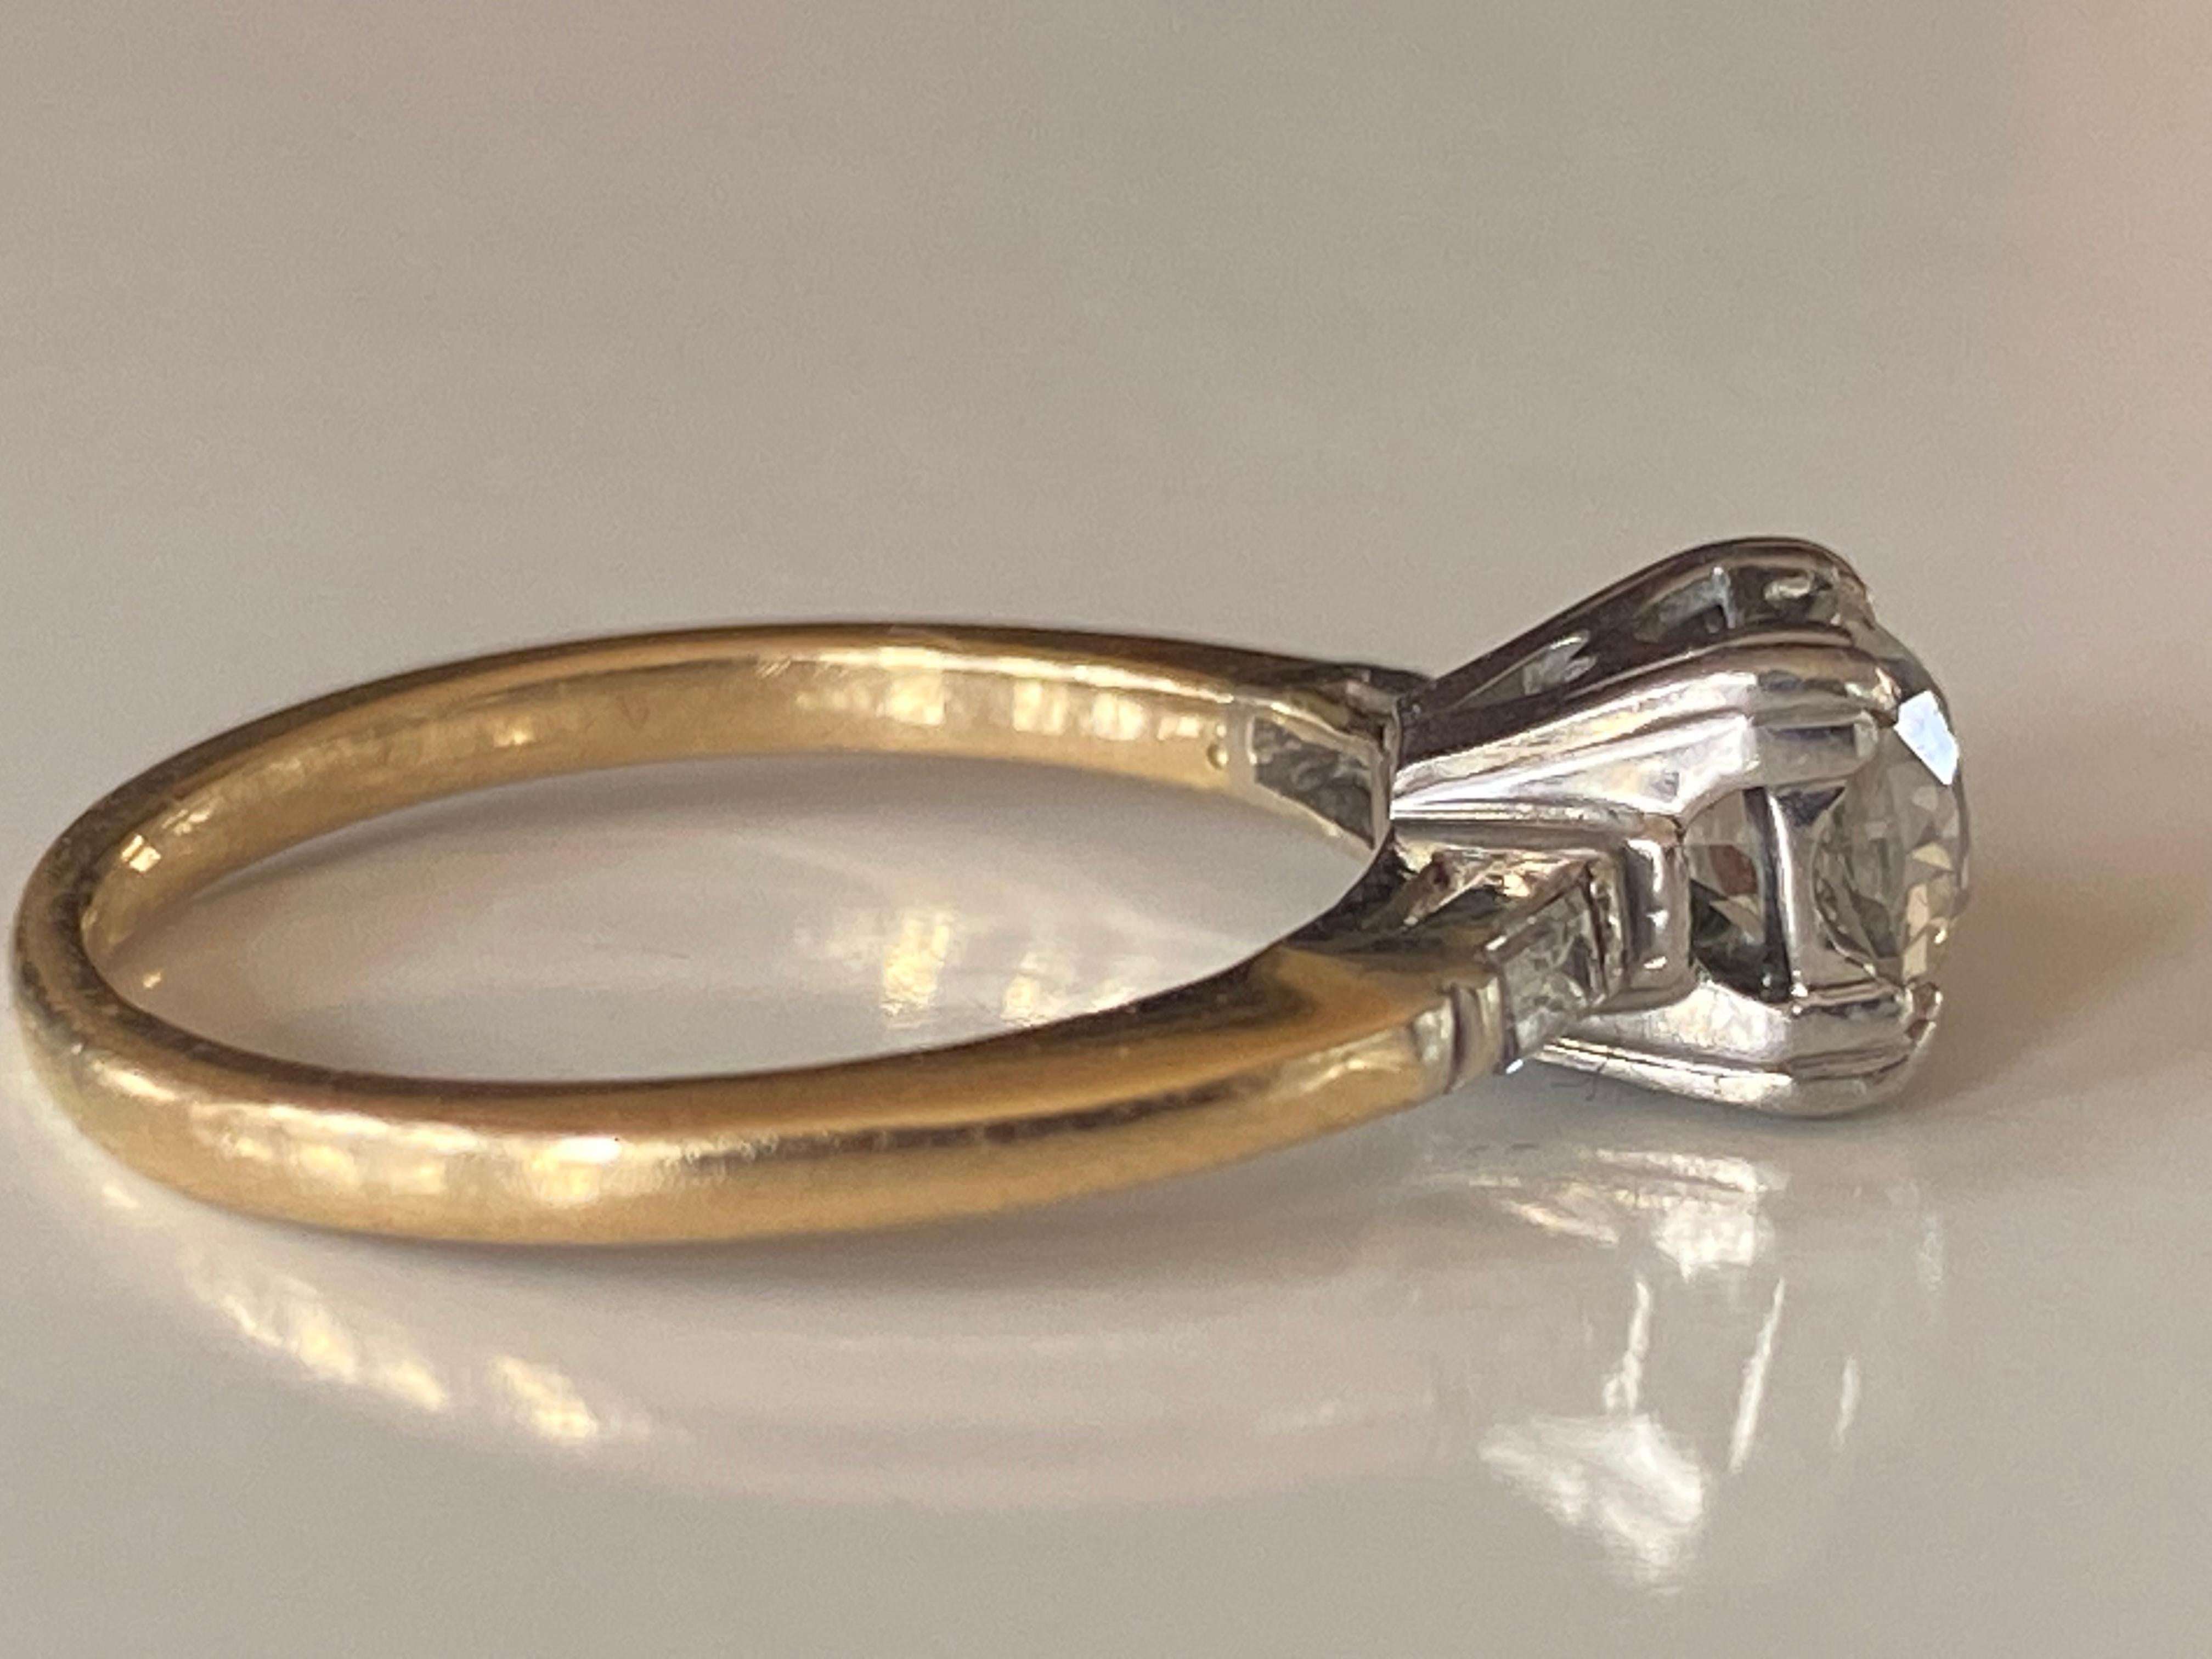 Retro Era Two Tone Diamond Engagement Ring In Good Condition For Sale In Denver, CO